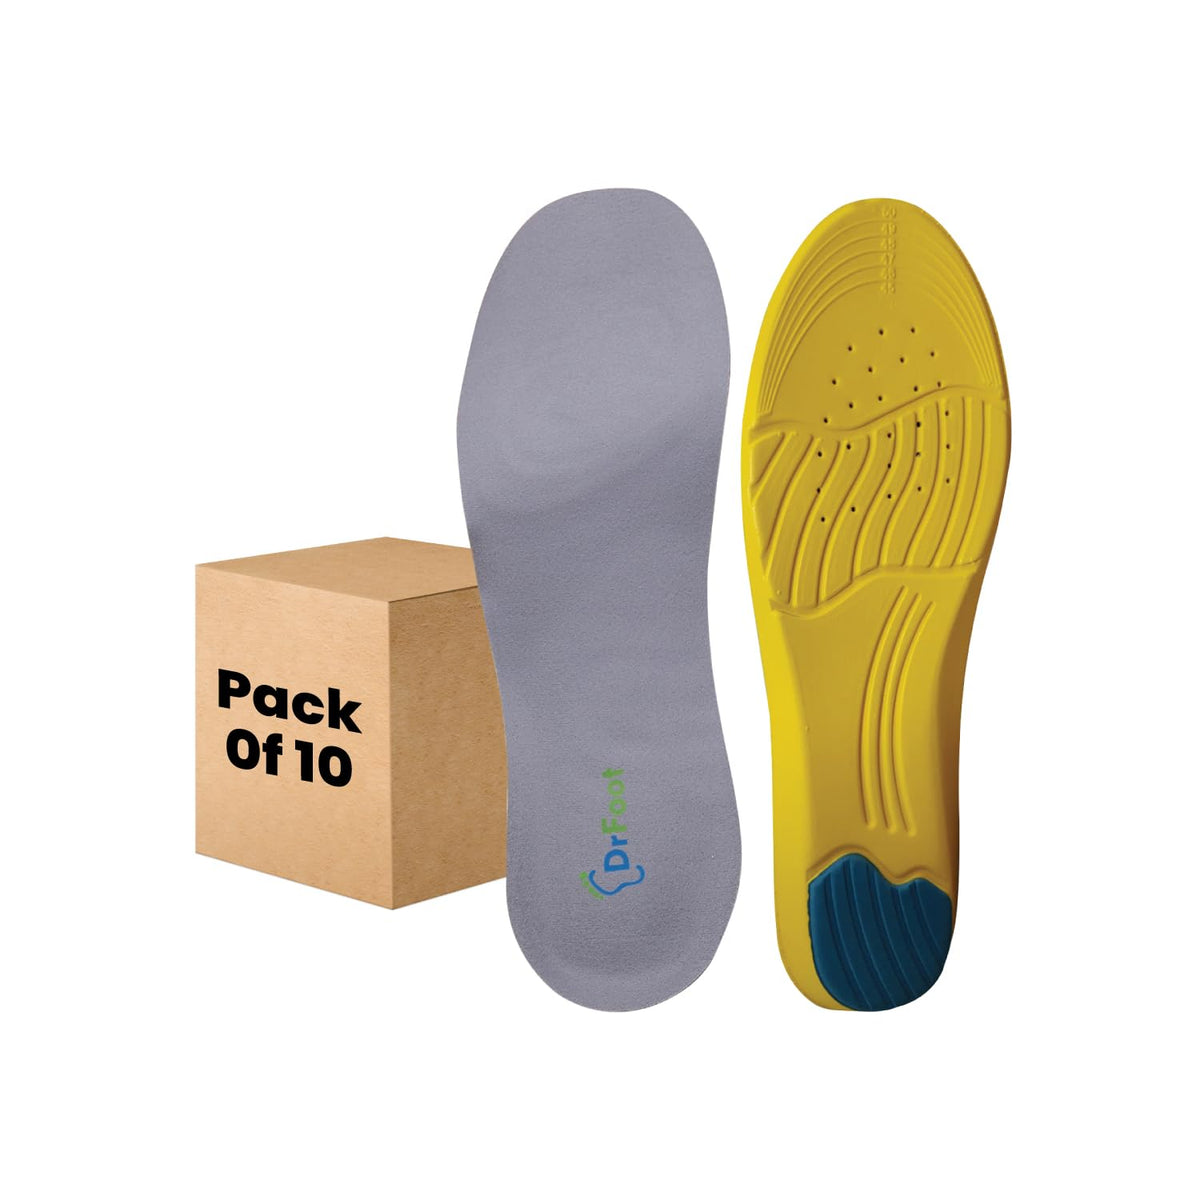 Dr Foot Gel Insoles Pair | For Walking, Running, Sports Shoes | All Day Comfort Shoe Inserts With Dual Gel Technology | Ideal Full-Length Sole For Every Shoe For Unisex- 1 Pair (Size - S) (Pack of 10)